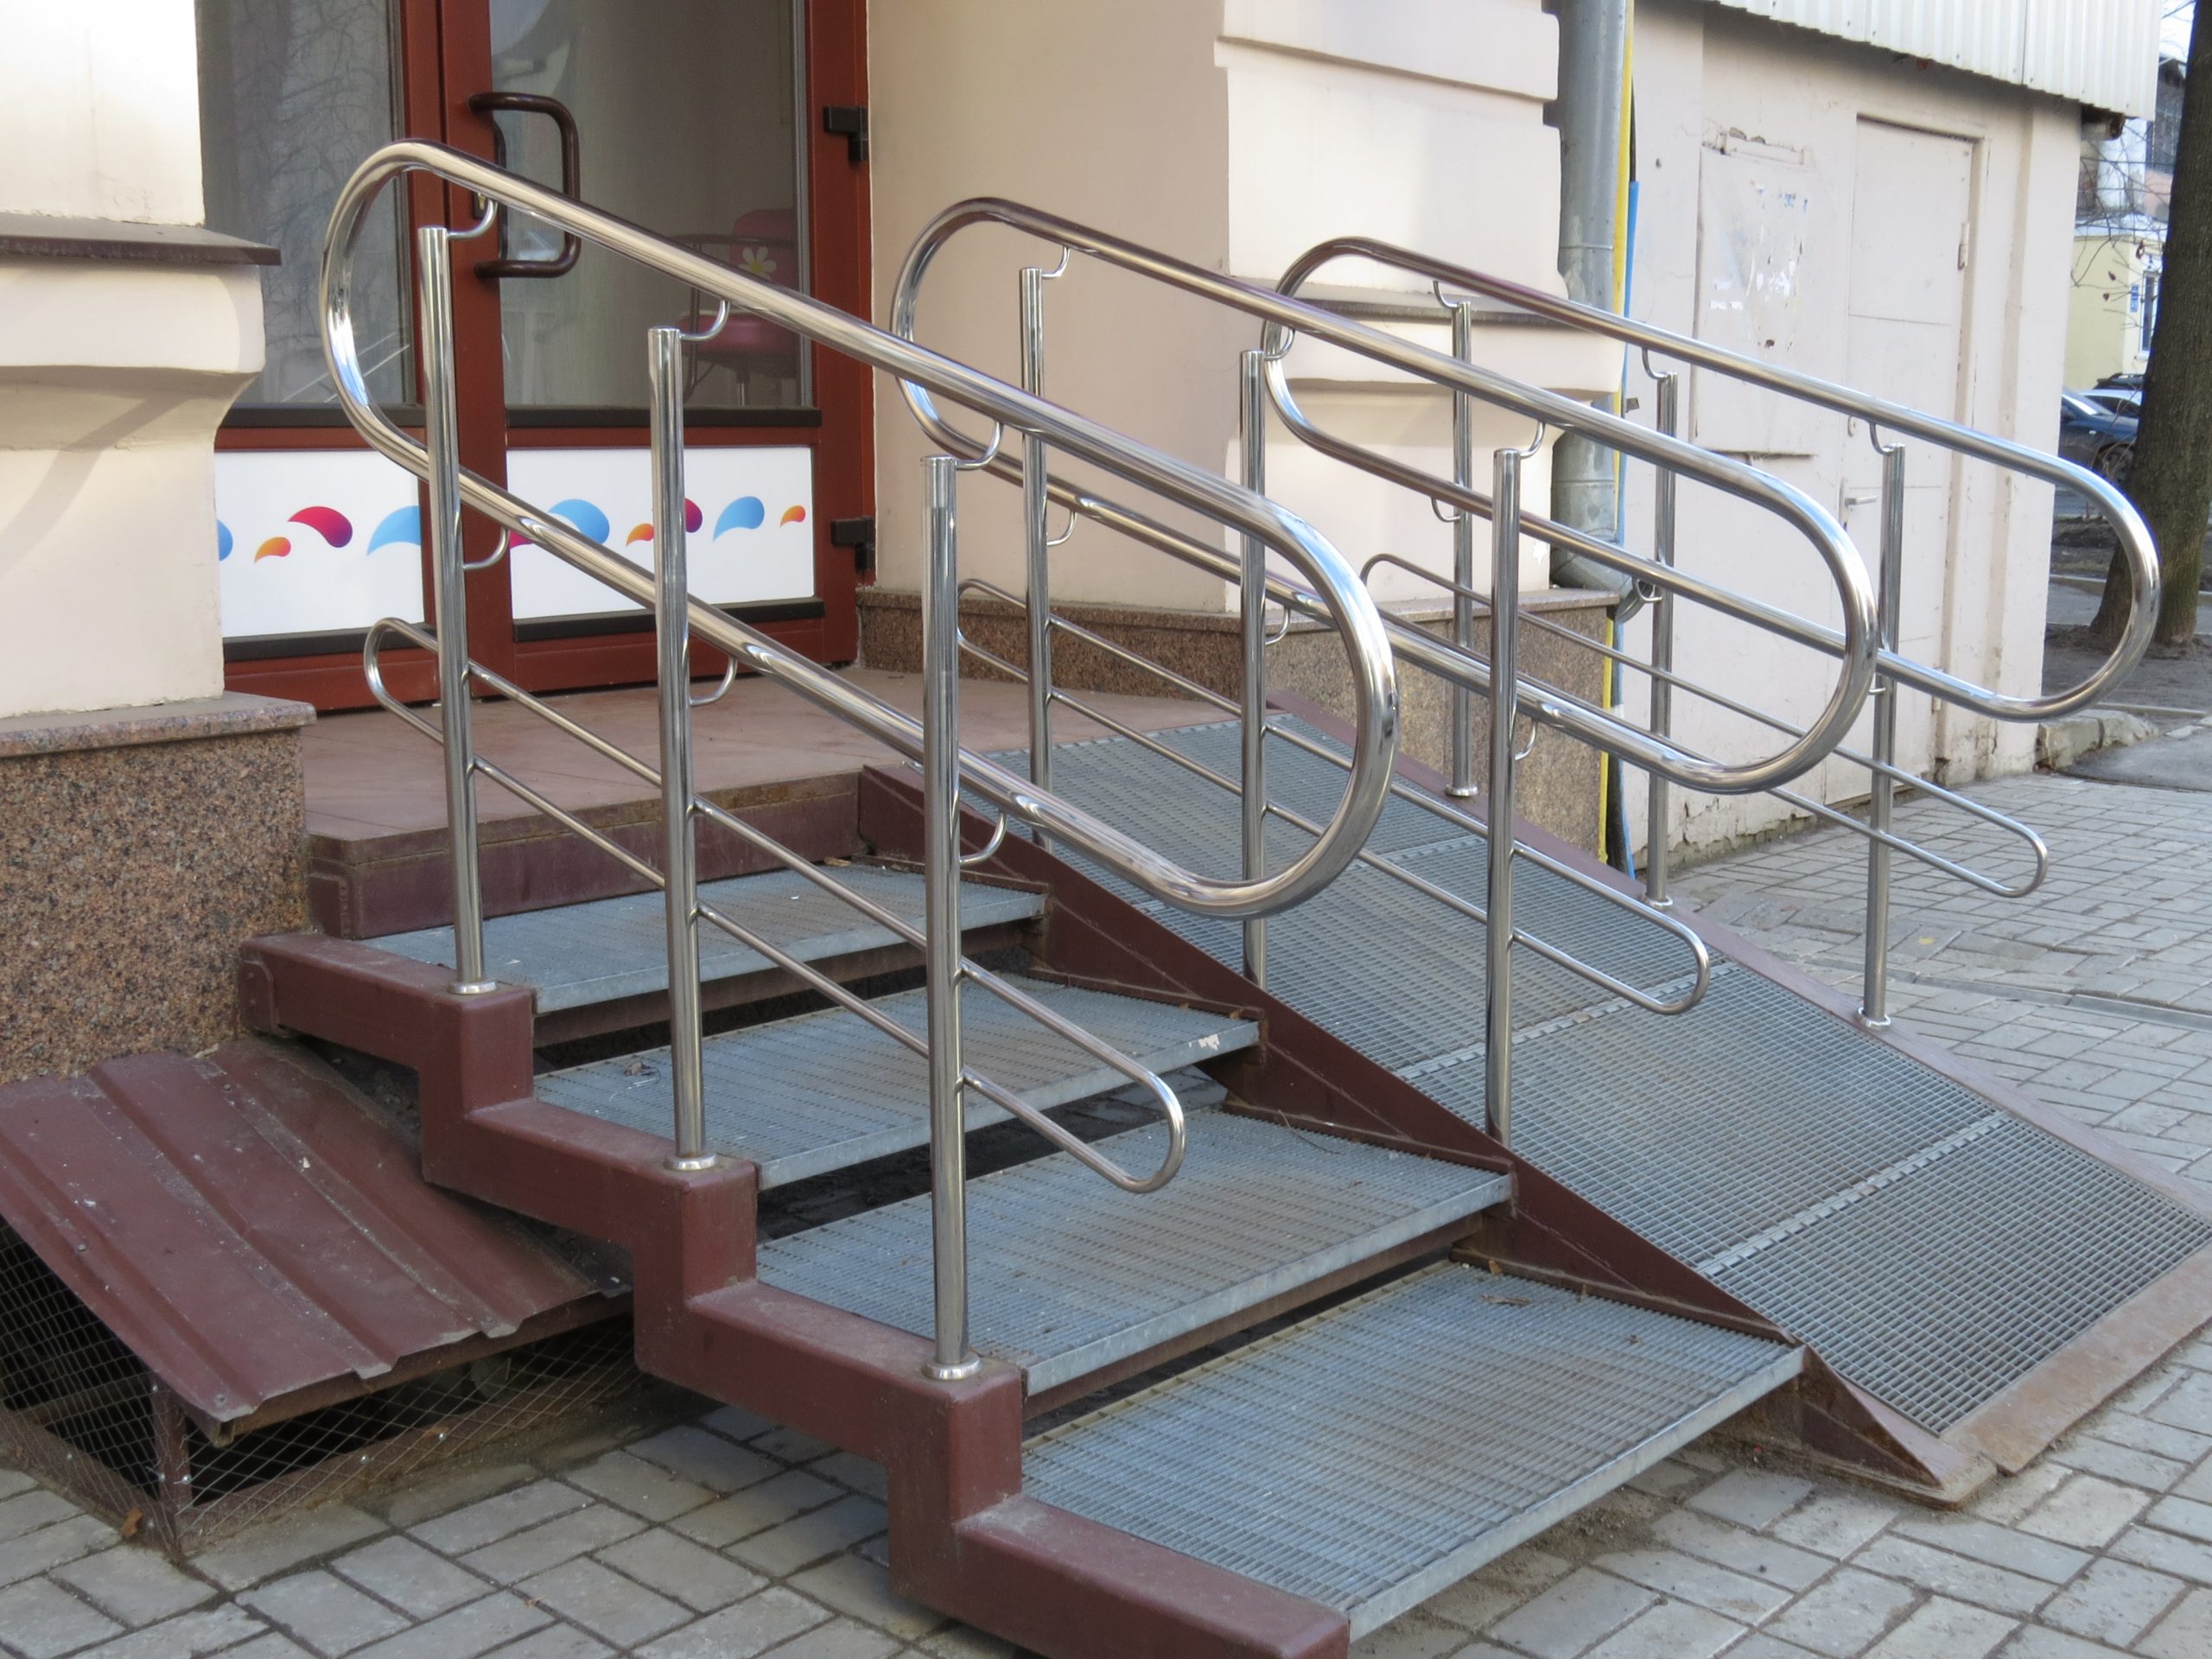 Two sets of stairs, one with a wheelchair ramp outside a building